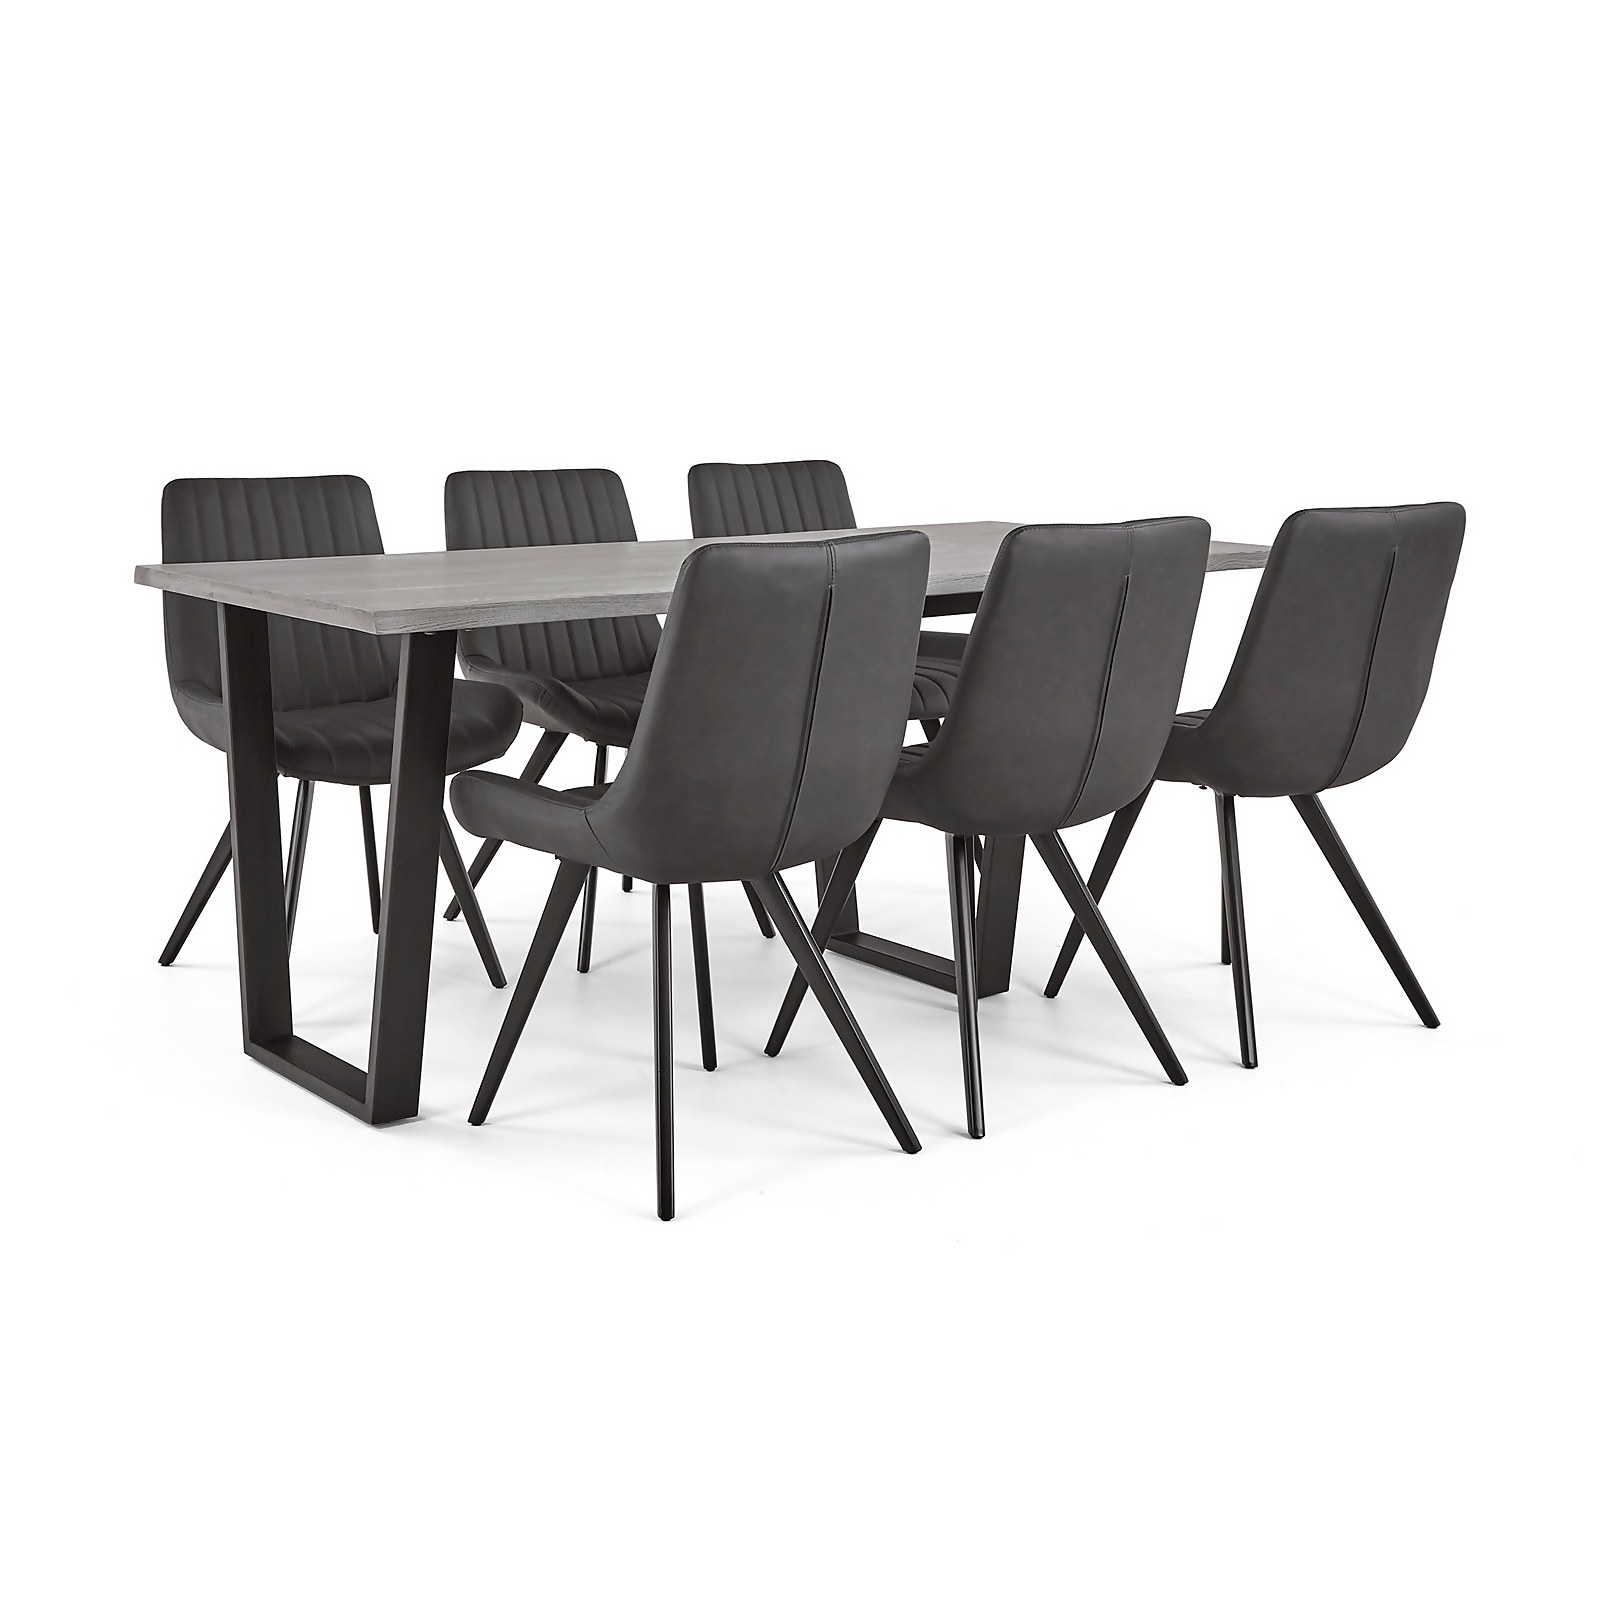 Photo of Dalston Dining Table And 6 Chairs - Charcoal